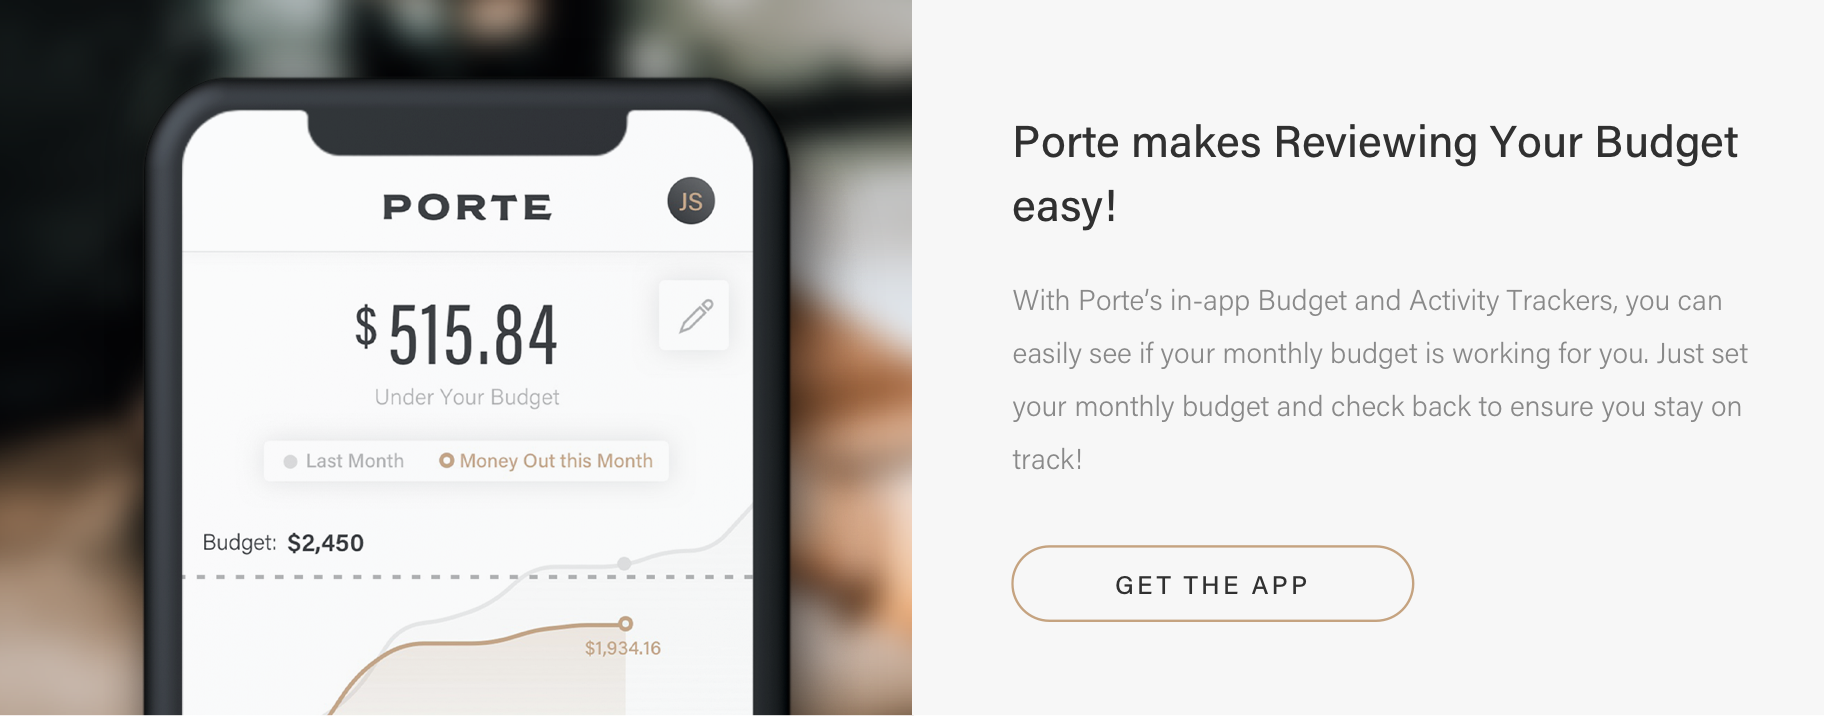 Porte Makes Reviewing Your Budget Easy